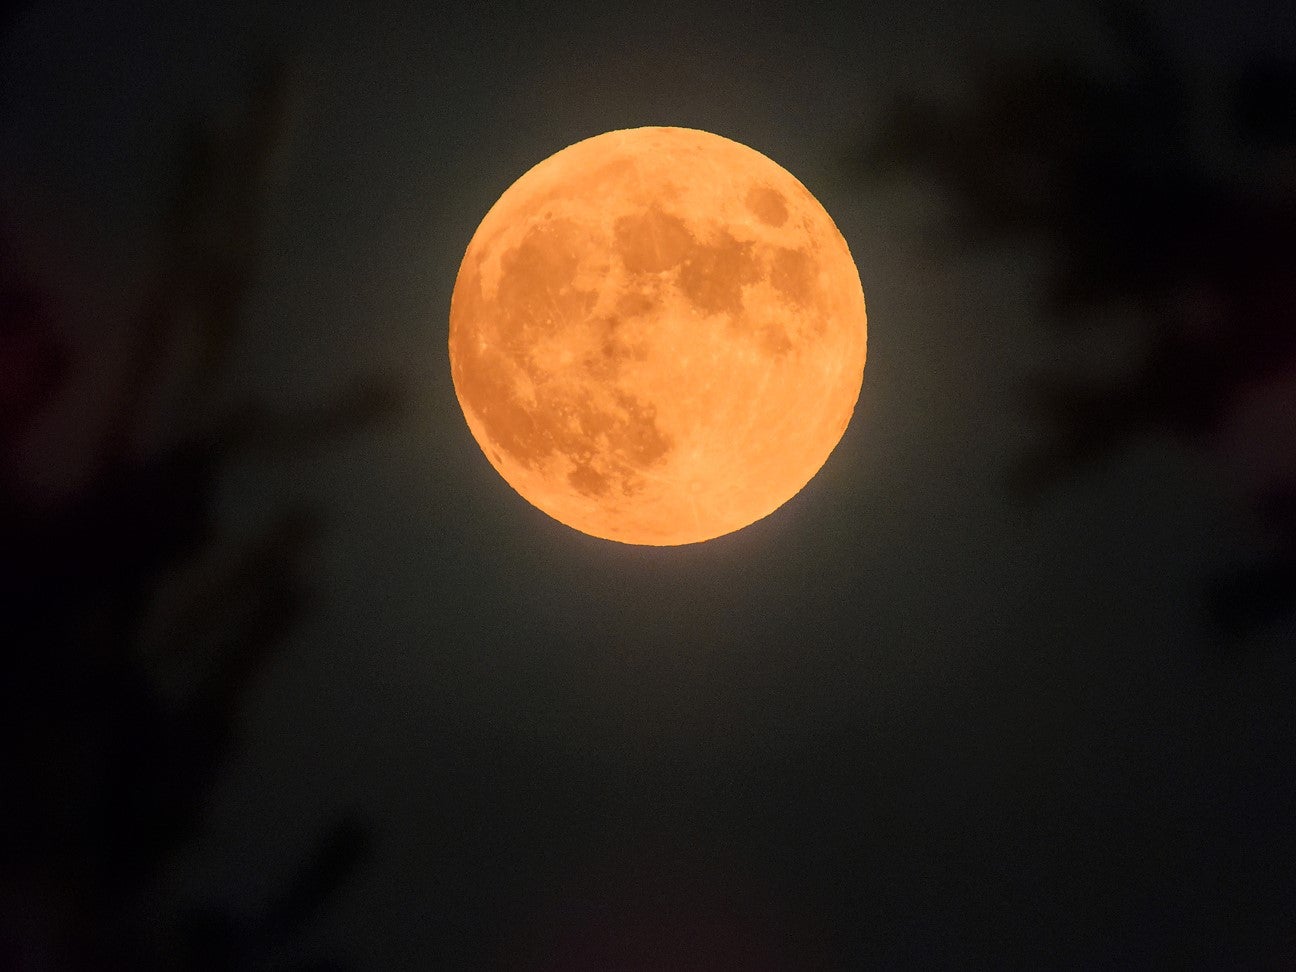 The full Moon in October 2021 is known as the Hunter’s Moon